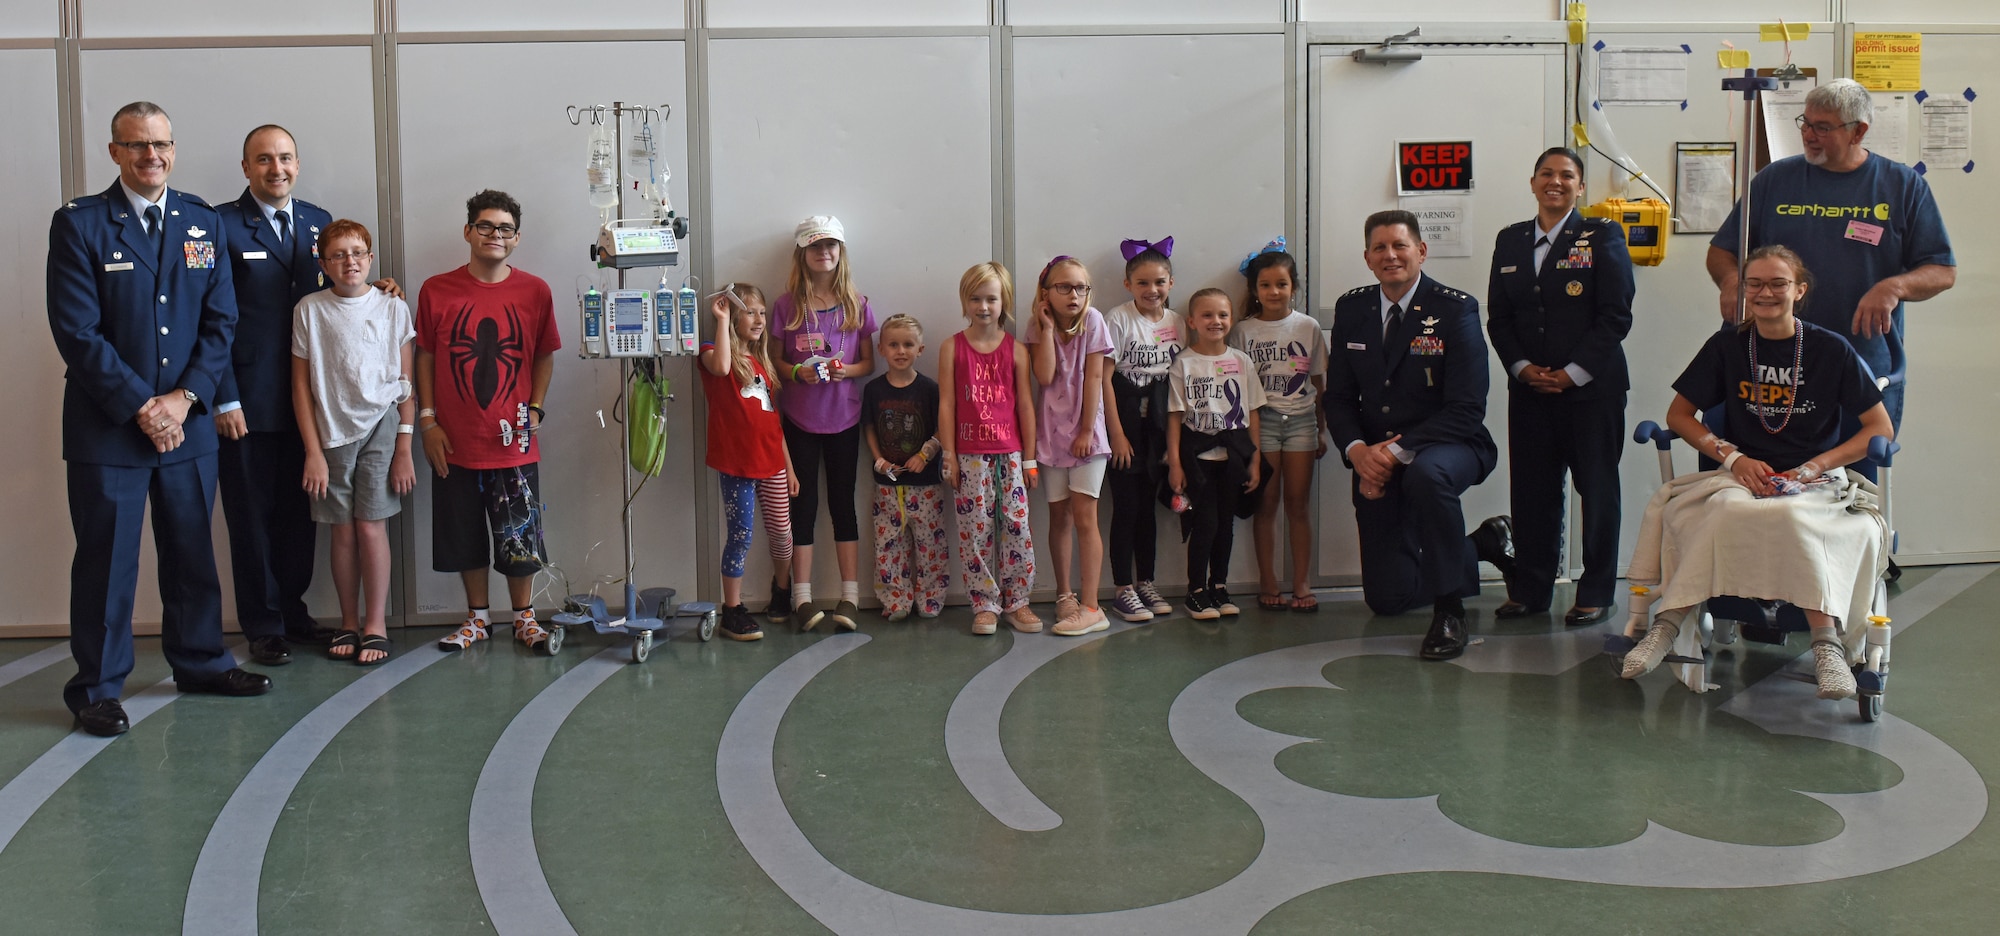 911th Operations Group Commander Col. Gregory Buchanan, Public Affairs Officer Capt. Justin Lewis, Air Force Space Command Vice Commander Lt. Gen. David Thompson, and Executive Assistant Capt. Marcianna Pease pose for a photo with patients and their families at Children’s Hospital of Pittsburgh, June 14, 2019.